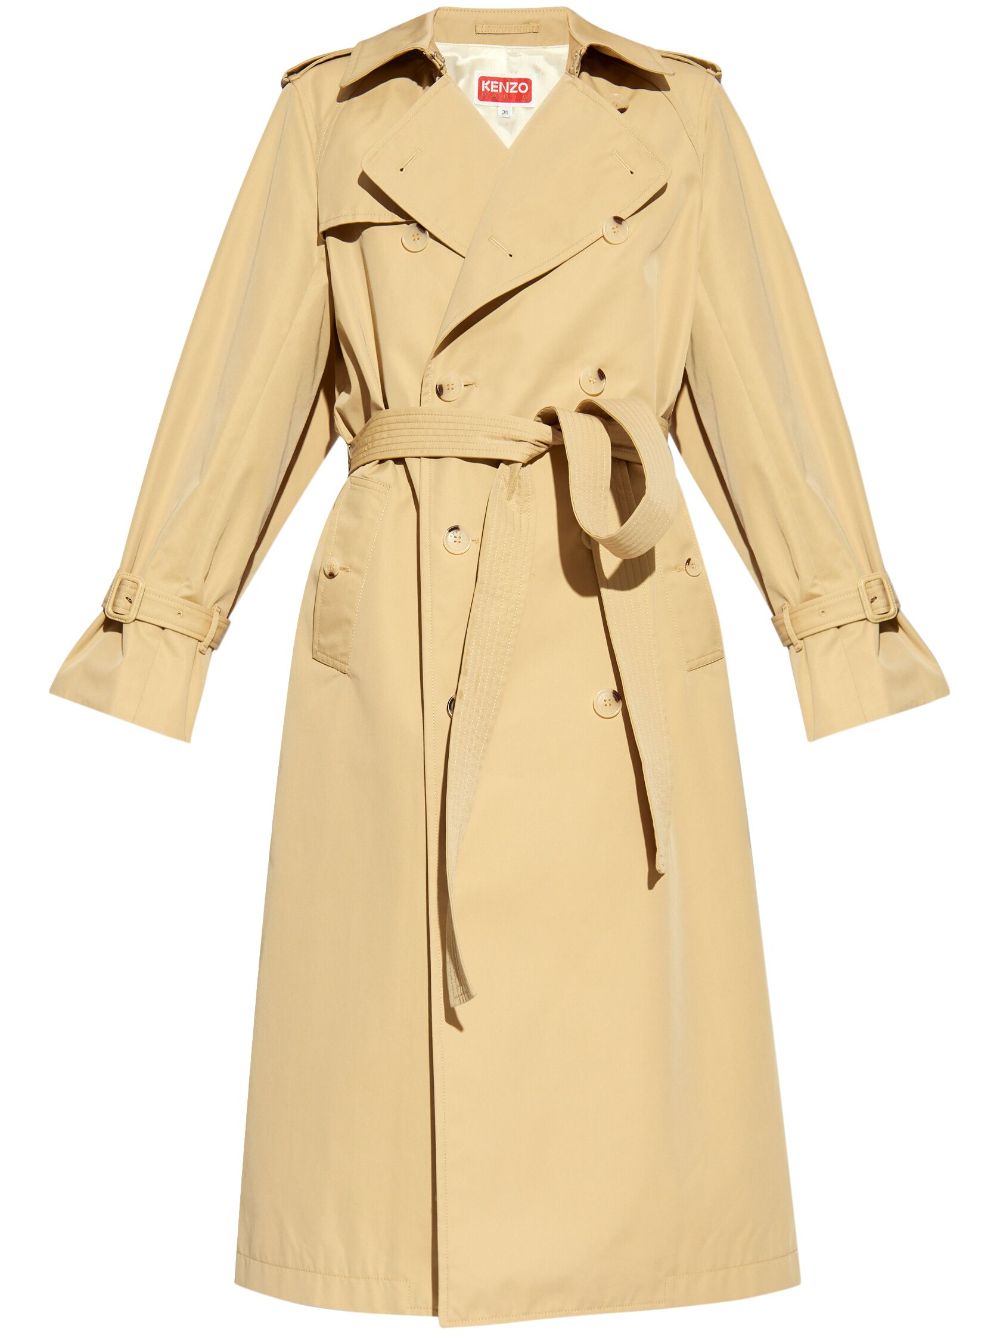 Kenzo cut-out double-breasted trench coat - Toni neutri